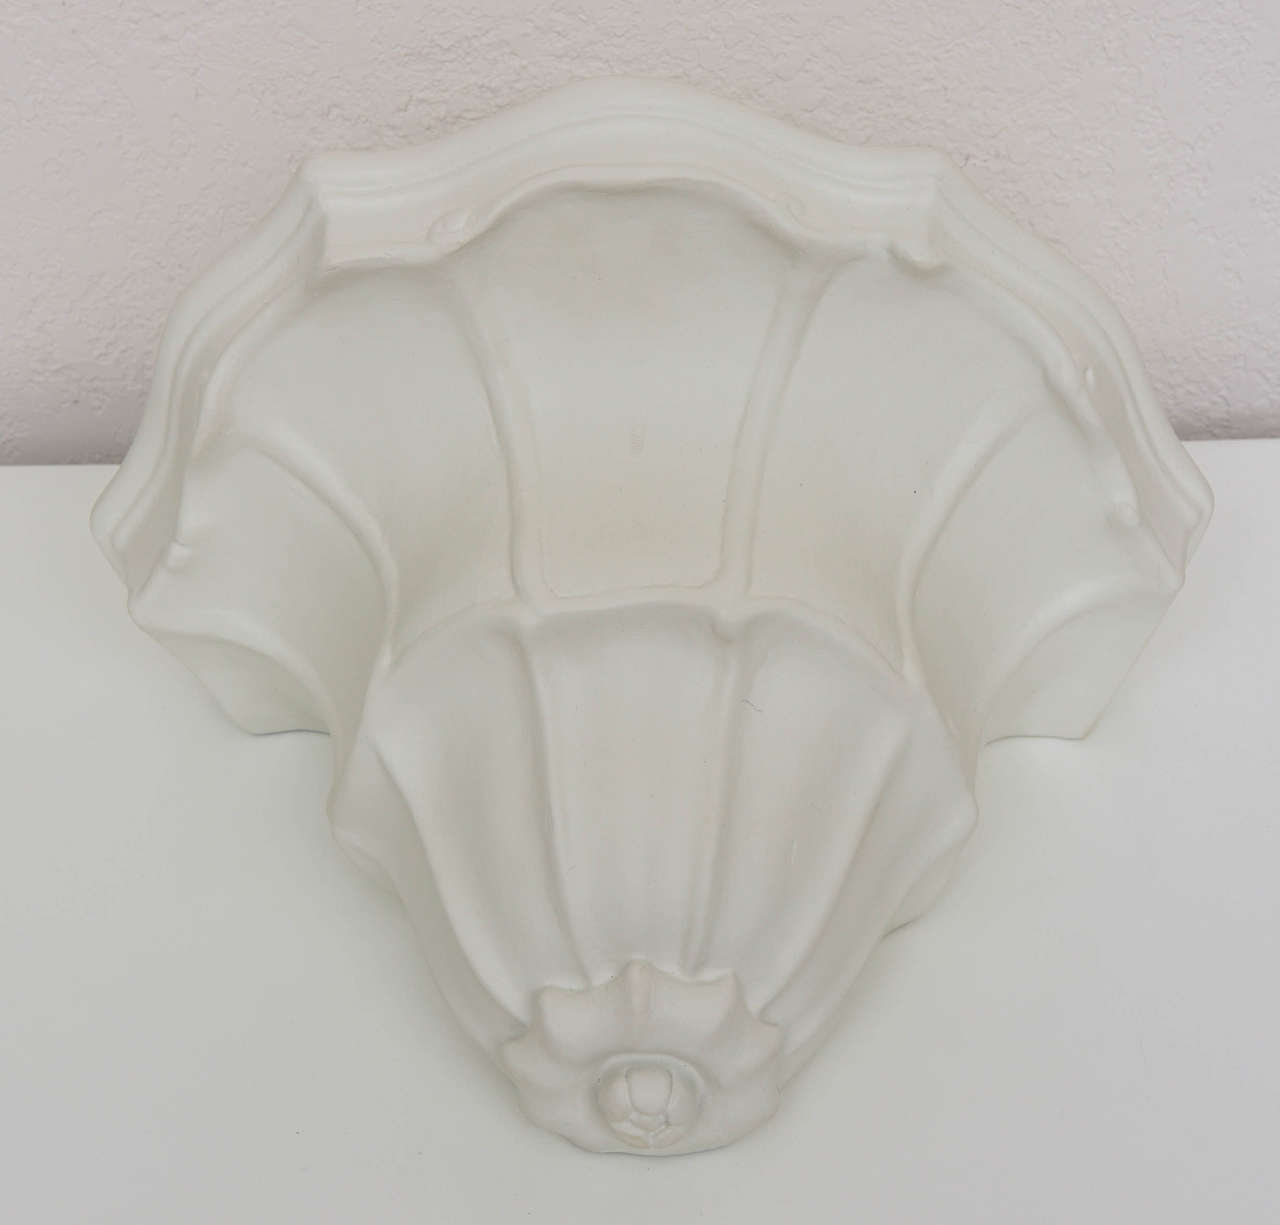 American Pair of White Plaster Wall-Shelves in the Style of Serge Roche: 20th Century